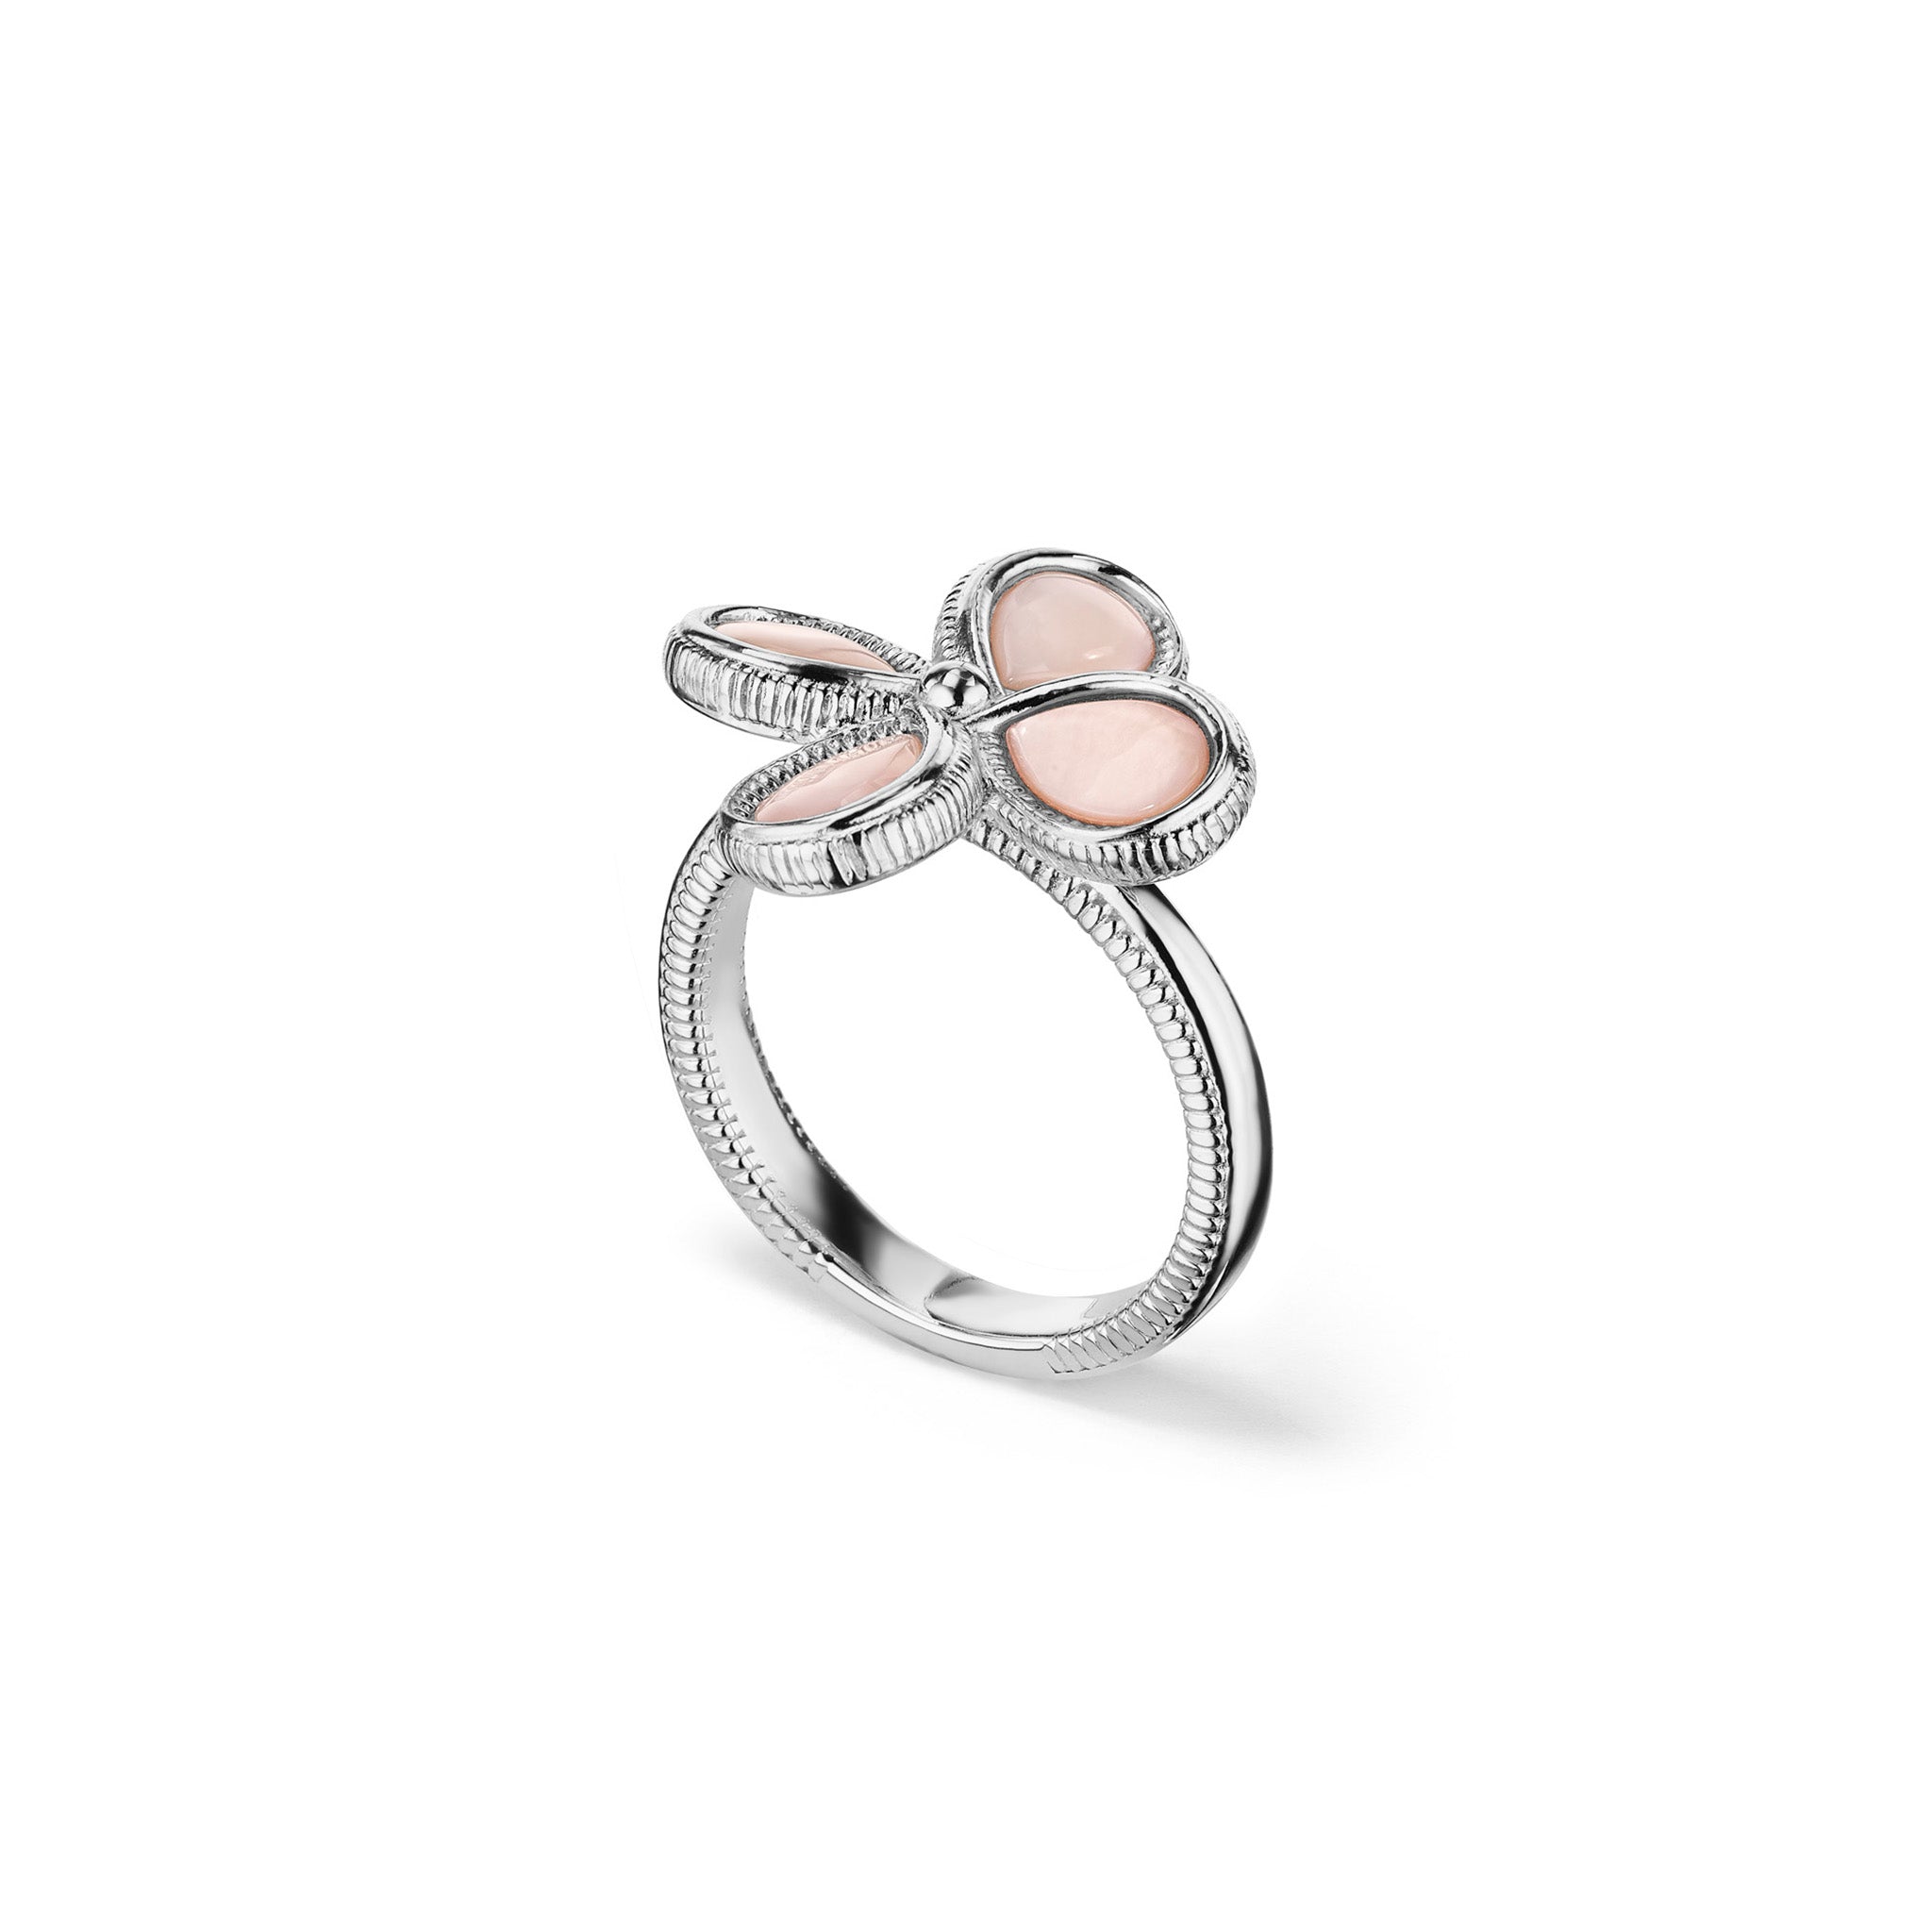 Jardin Flower Ring with Pink Mother of Pearl